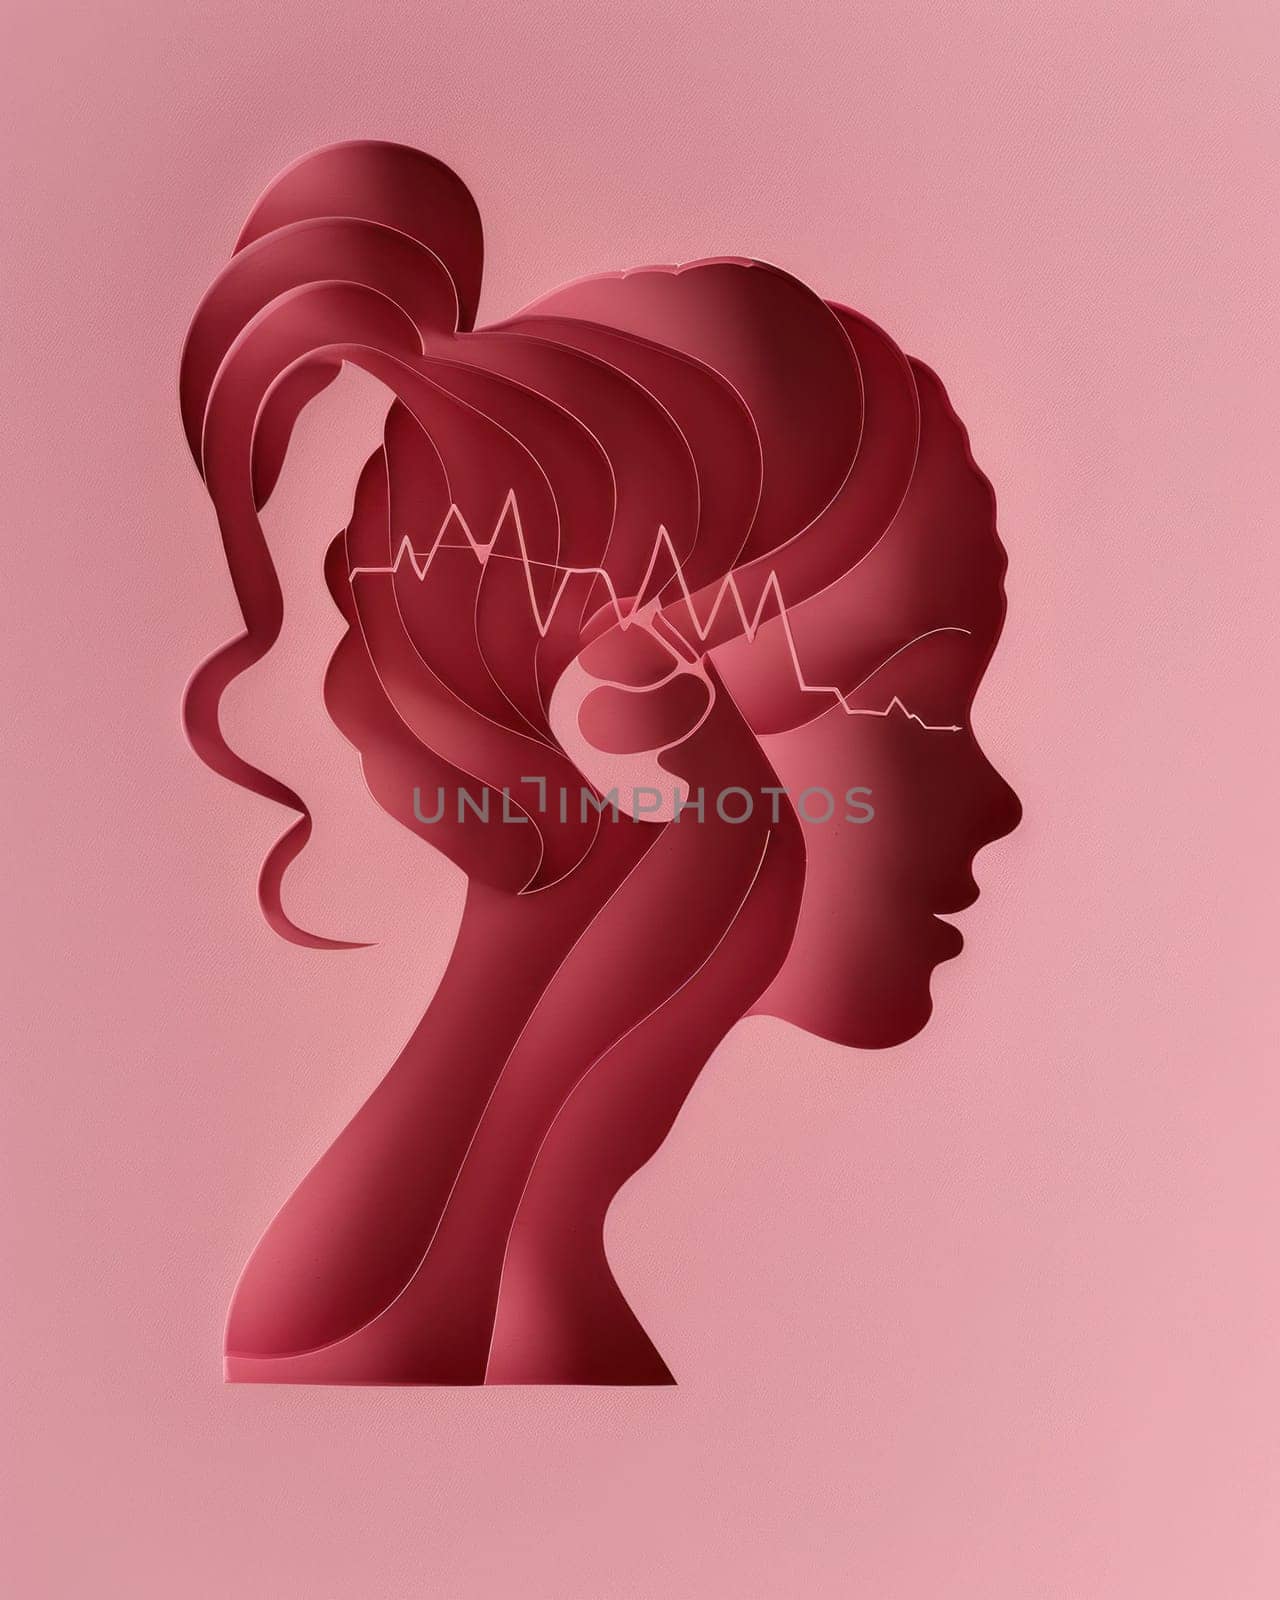 Woman's head with heartbeat line symbolizing mental health awareness and emotional resilience in medical illustration